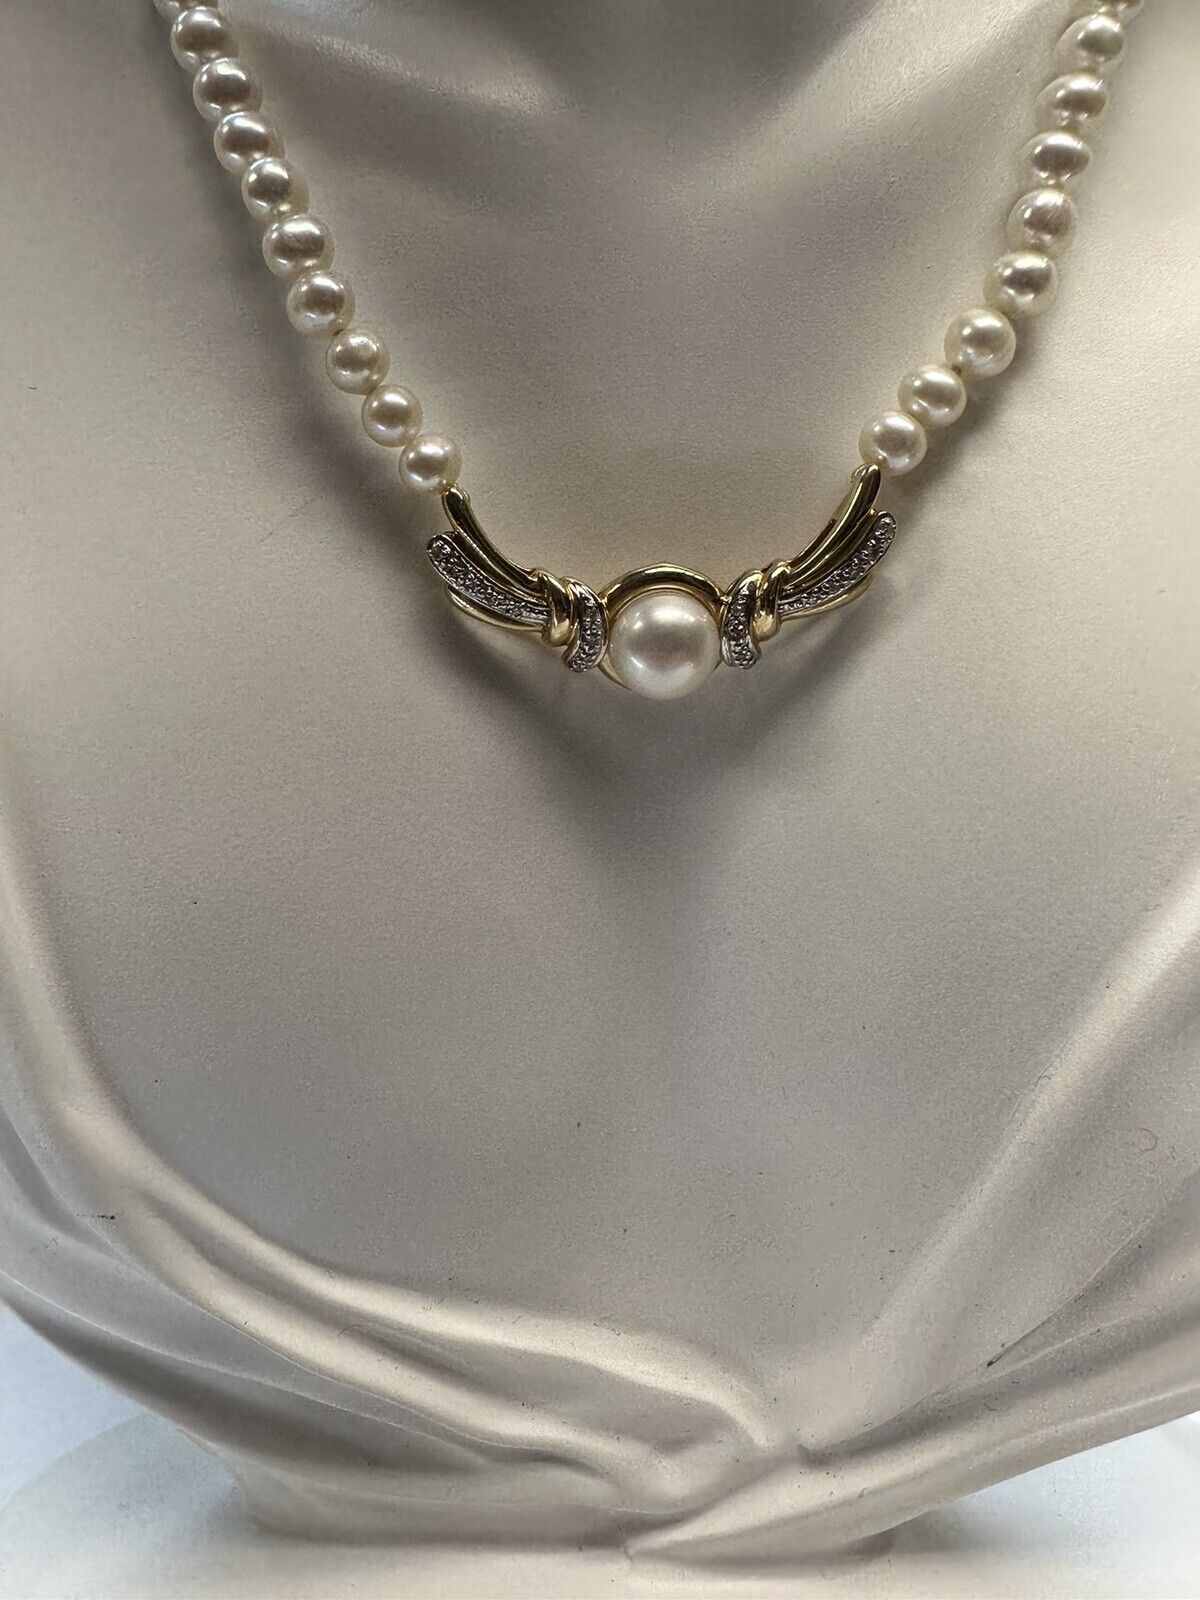 14k Gold necklace with pearls - image 2